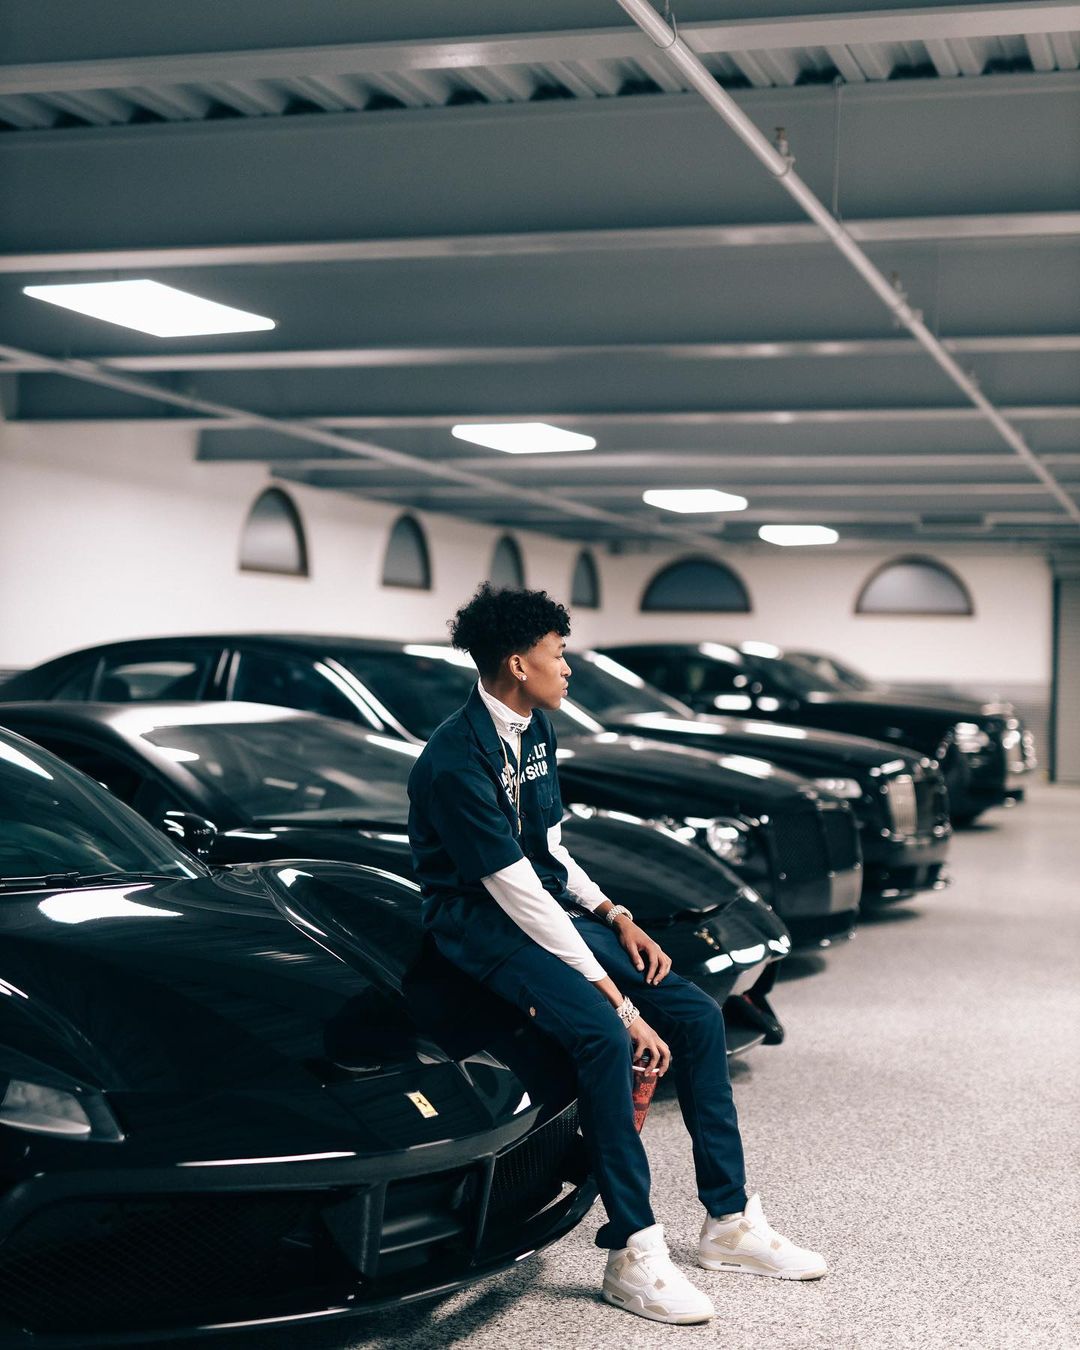 The inside life of Floyd Mayweather's children, including Zion's fashion range and Koraun singing career. Devion's incredible cars are also featured.